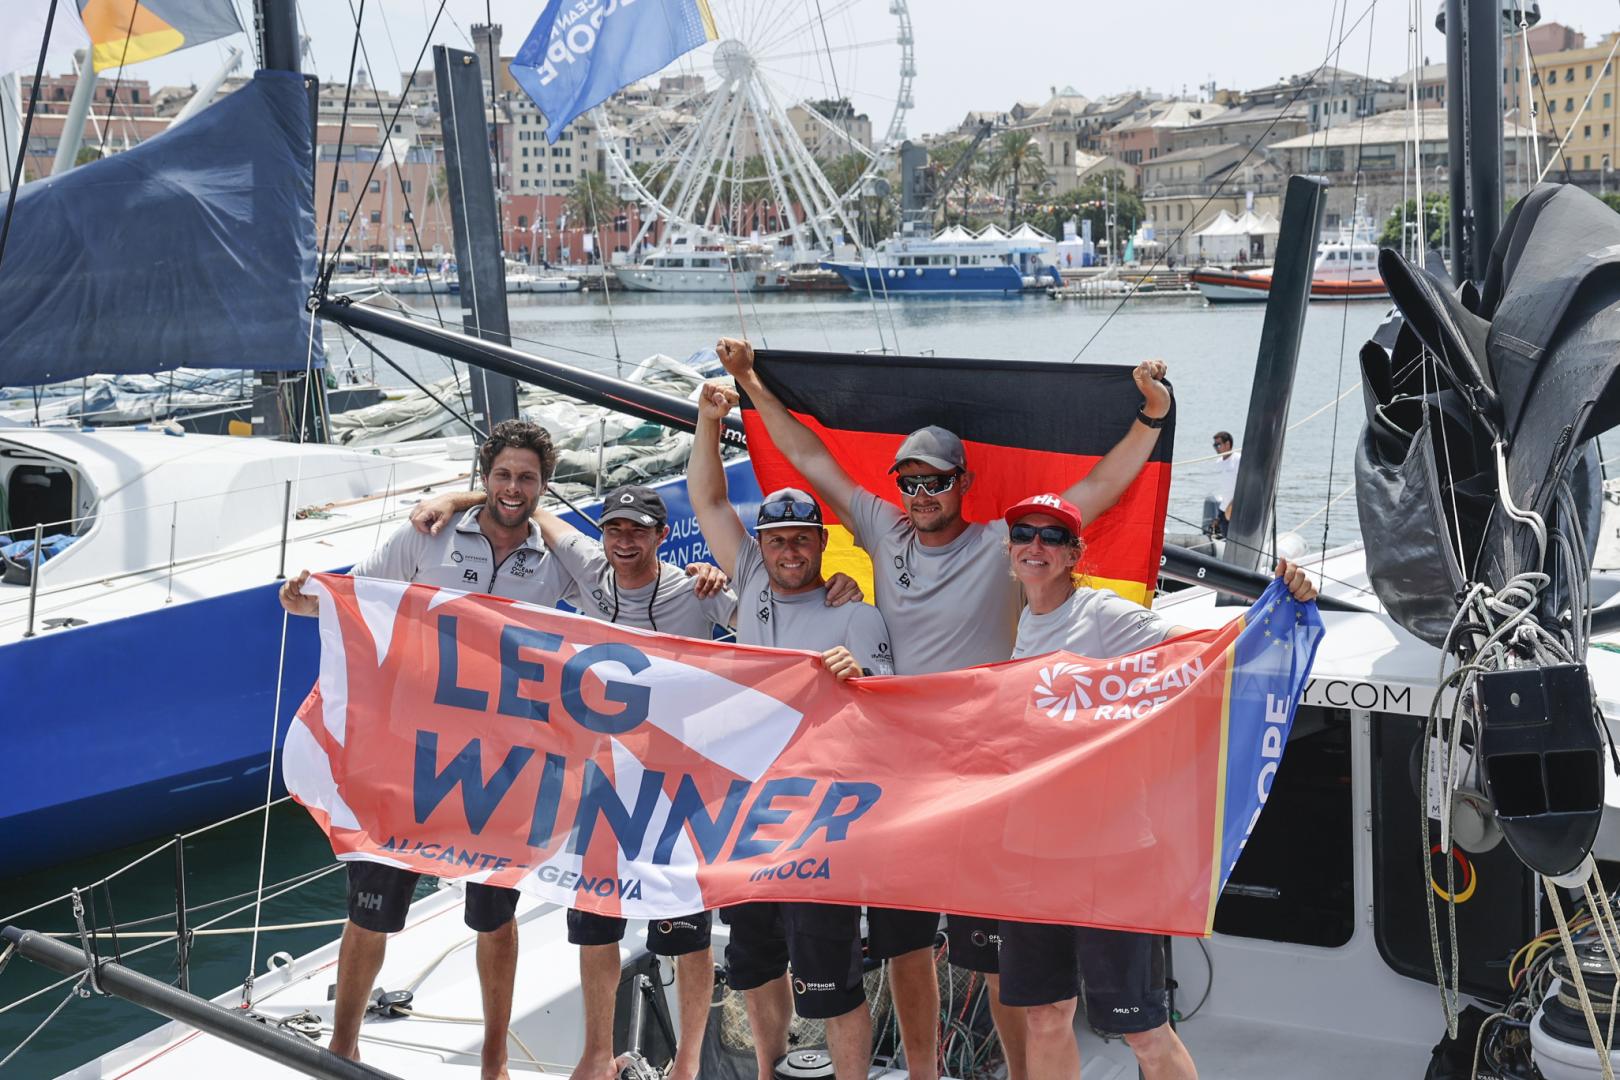 The finish of Leg 3 of The Ocean Race Europe from Alicante, Spain into Genova, Italy.